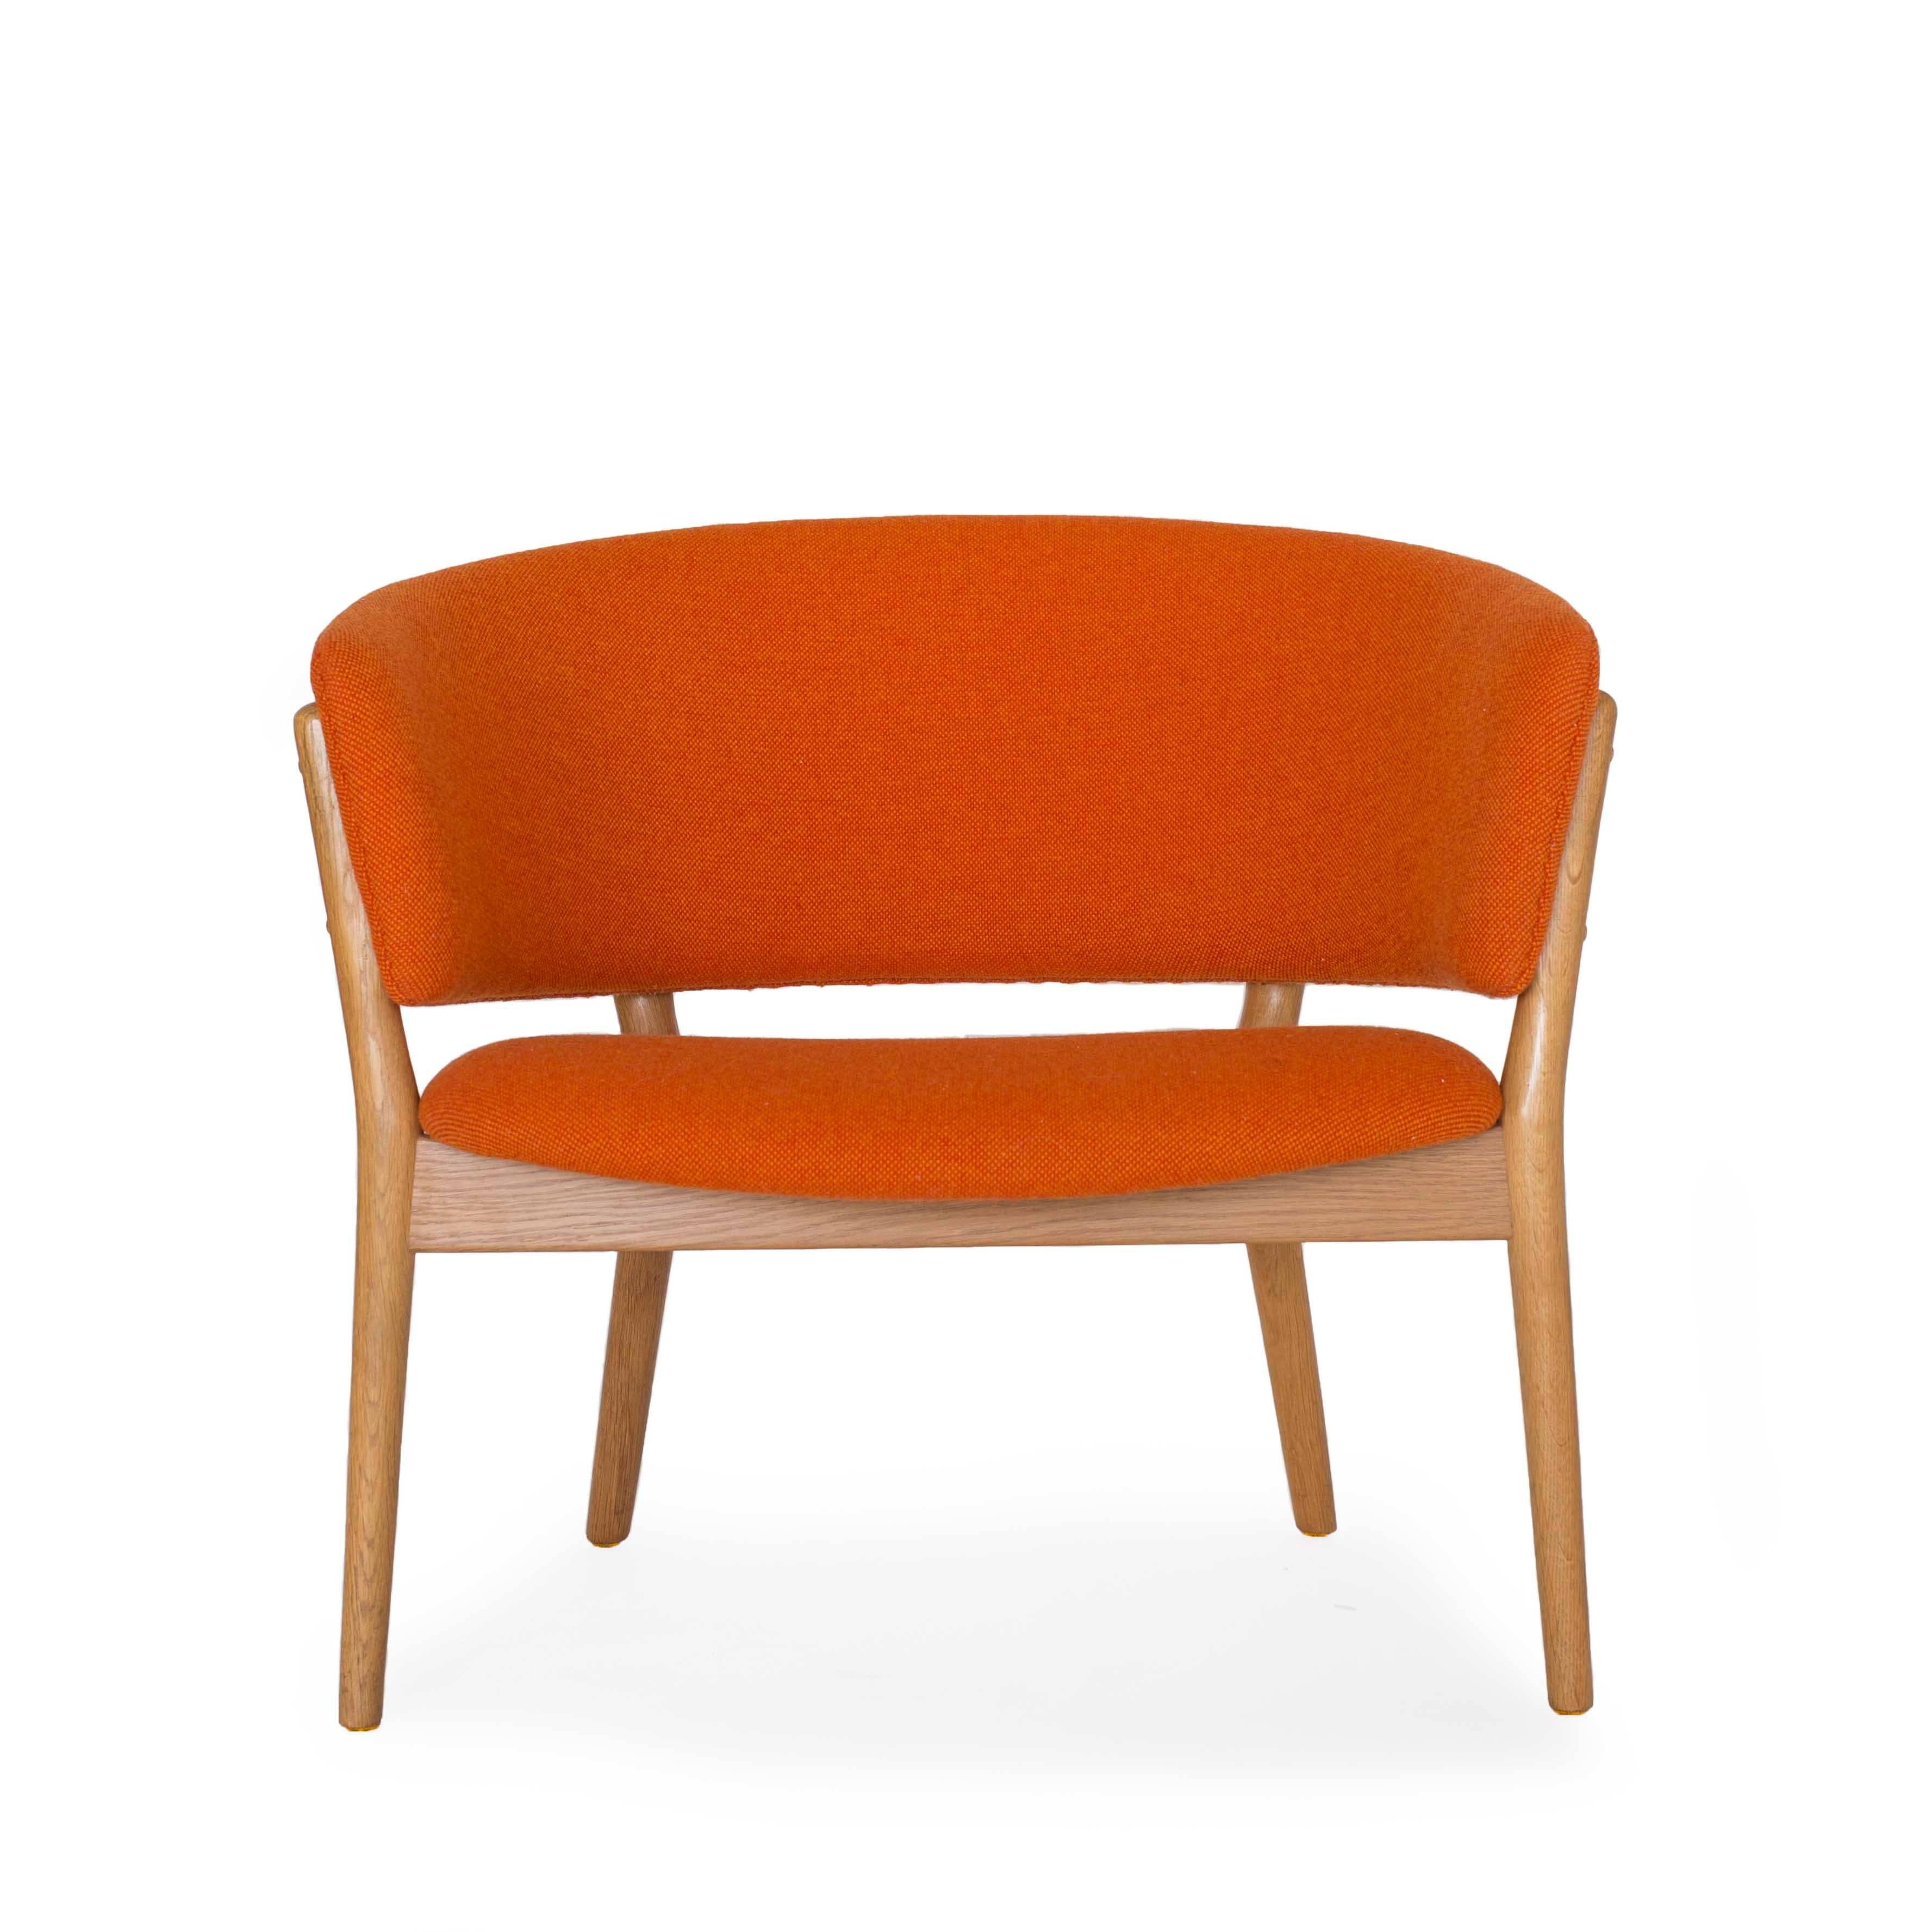 Nanna Ditzel oak easy chair upholstered with orange Hallingdal fabric. 

Designed by Ditzel in 1952, manufactured by Søren Willadsen, Denmark model ND83.
Four chairs available.